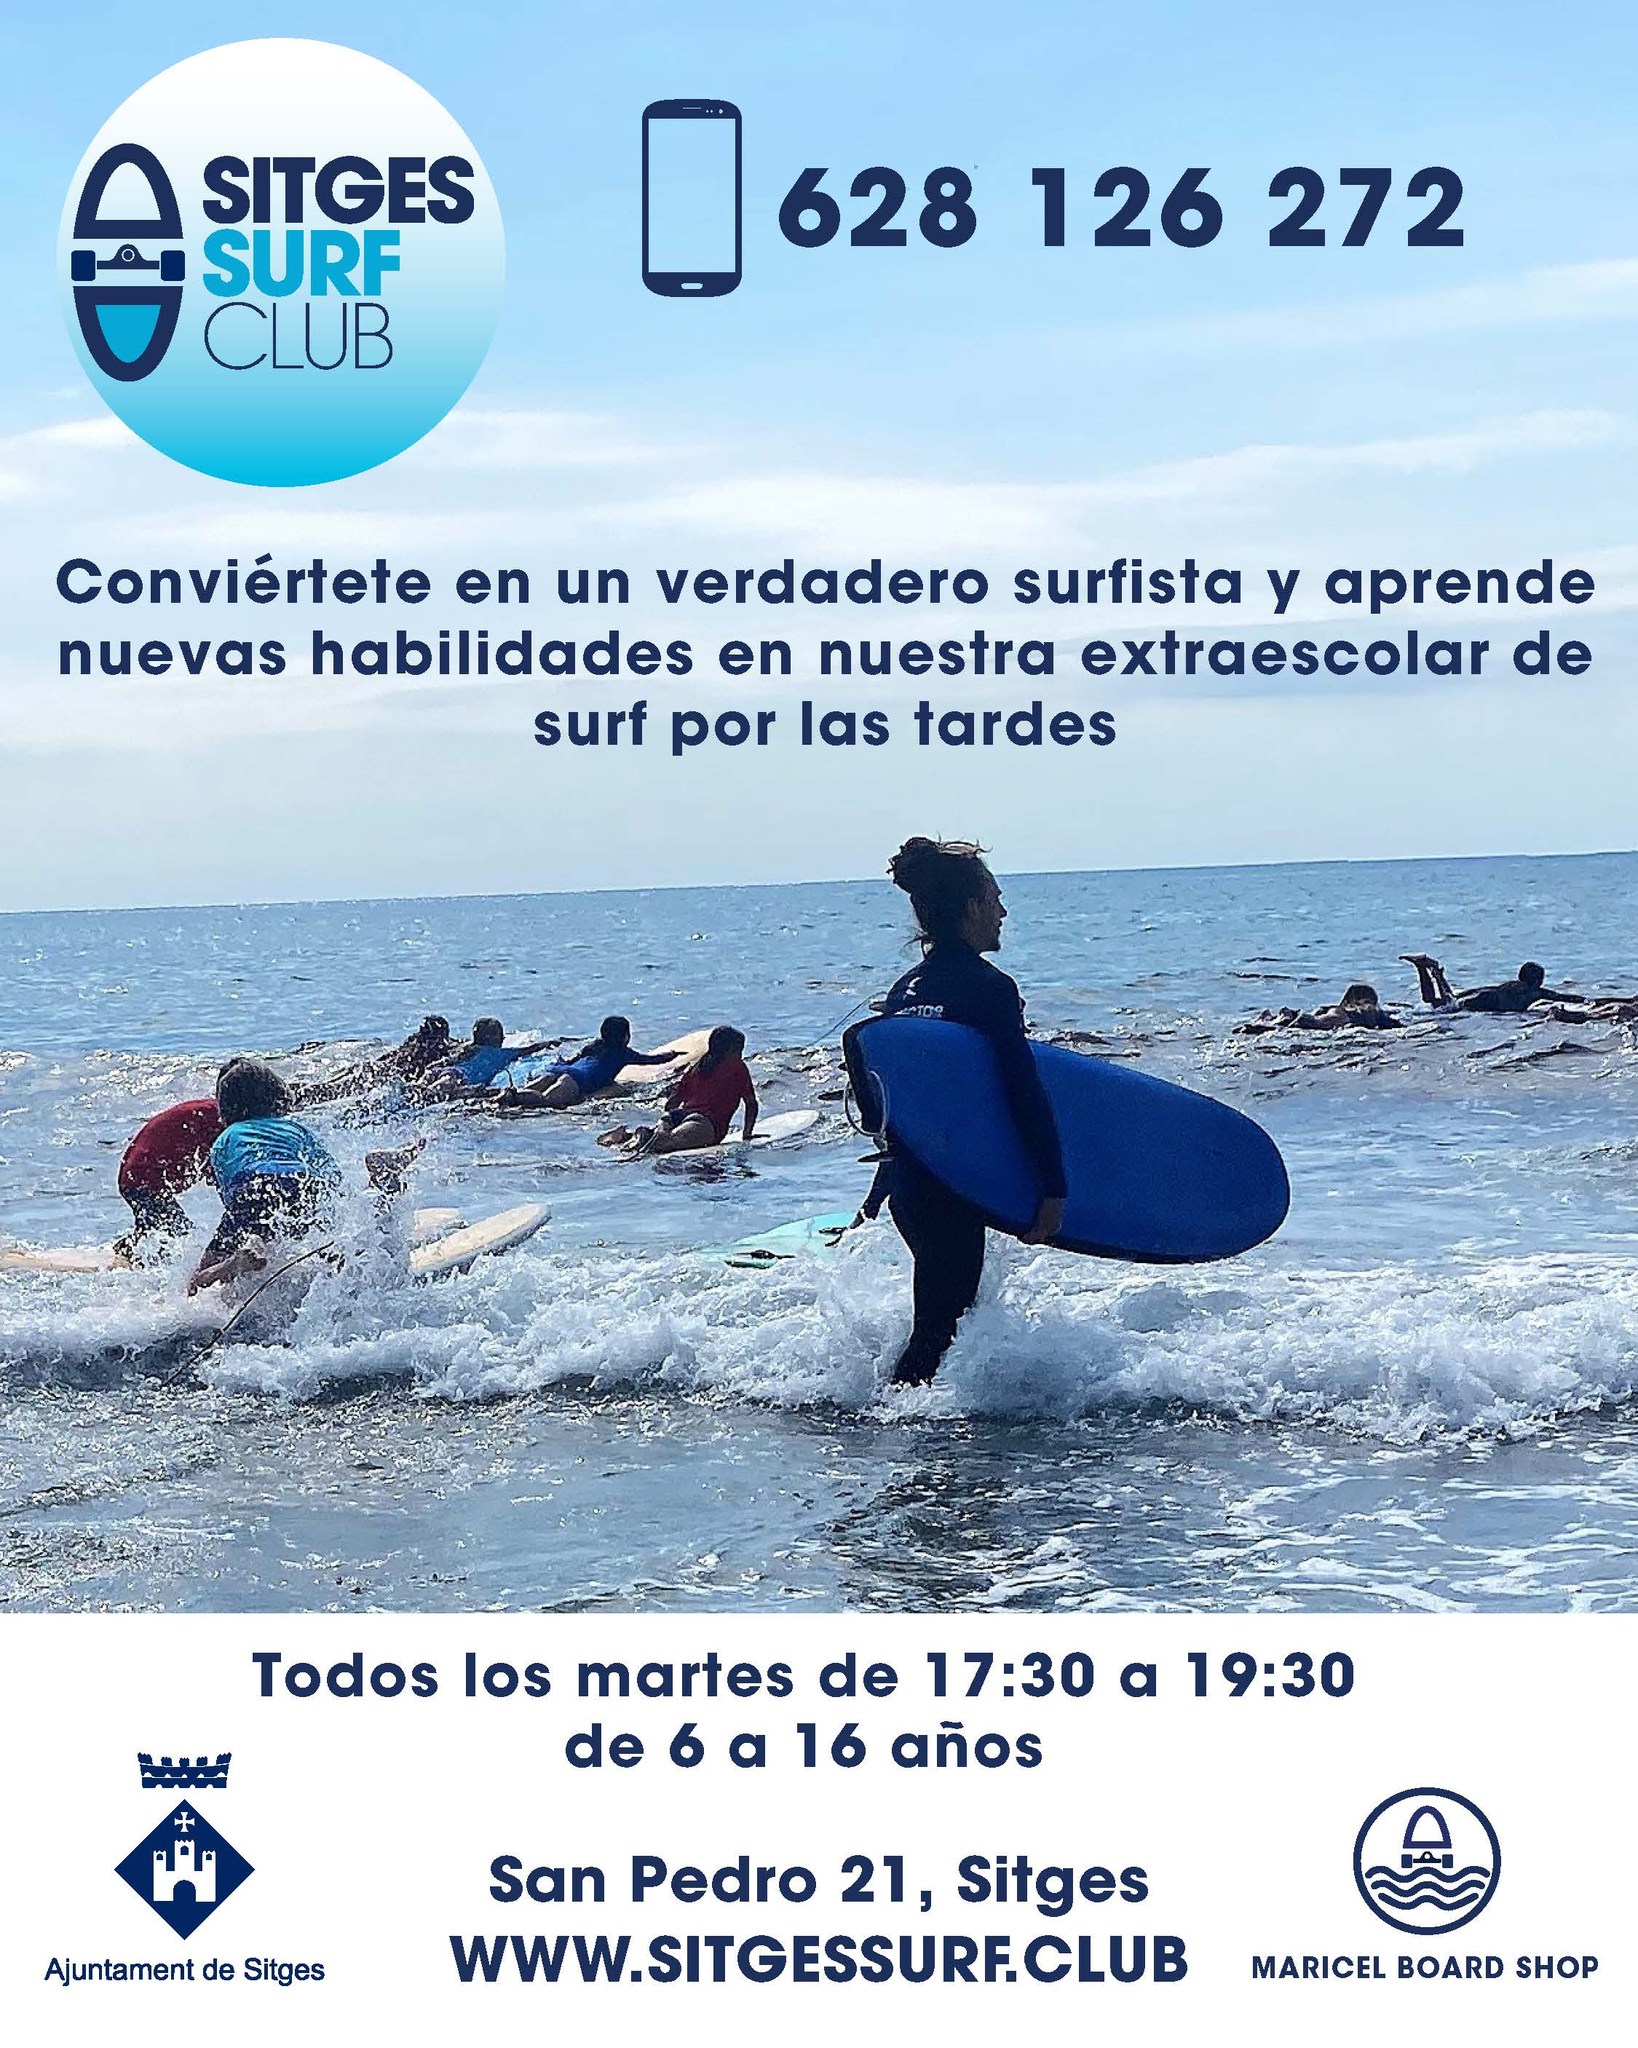 clases surf sitges